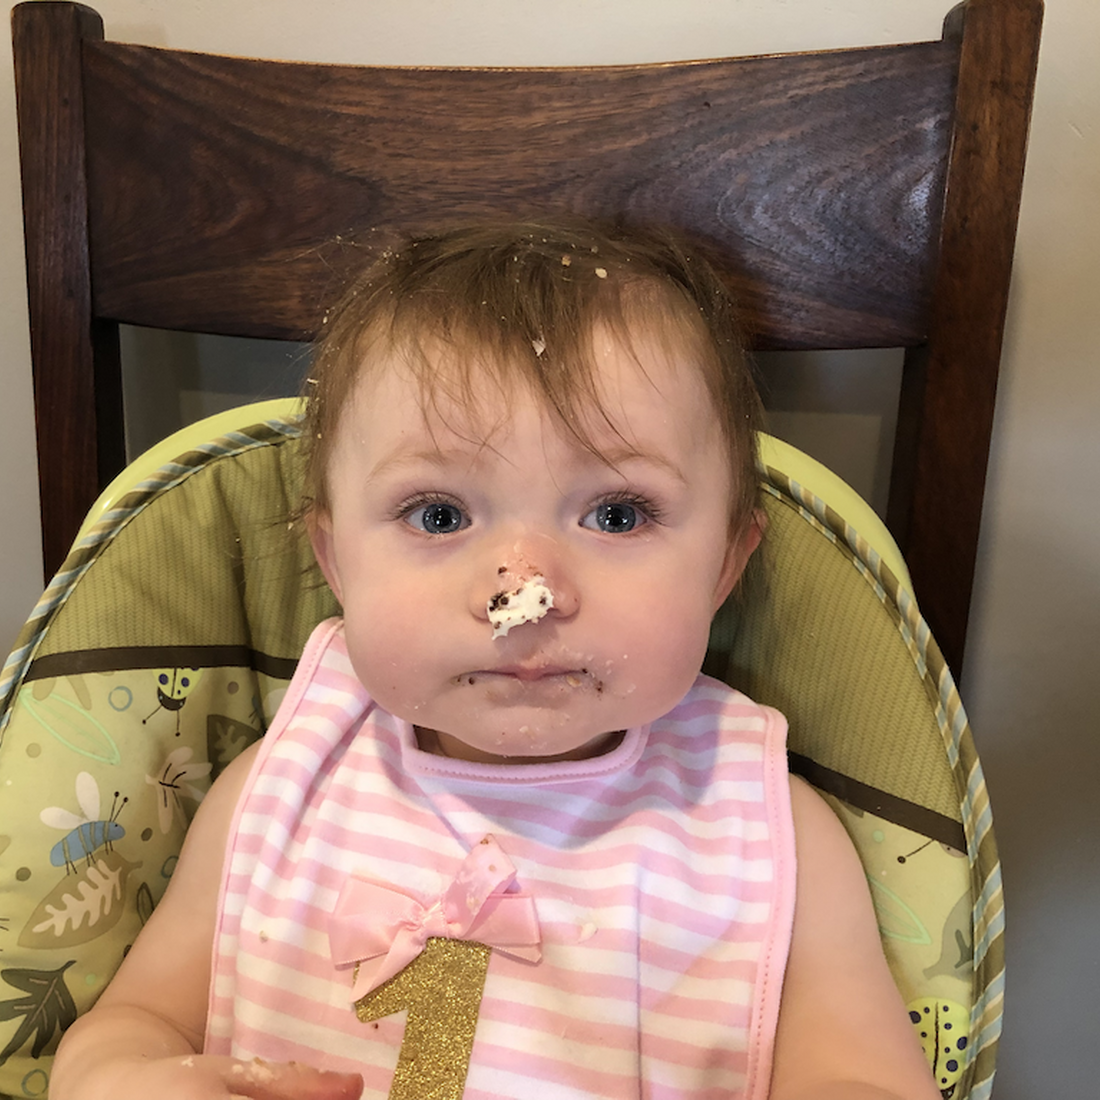 A young baby girl sitting in a high chair covered in what looks like birthday cake and frosting